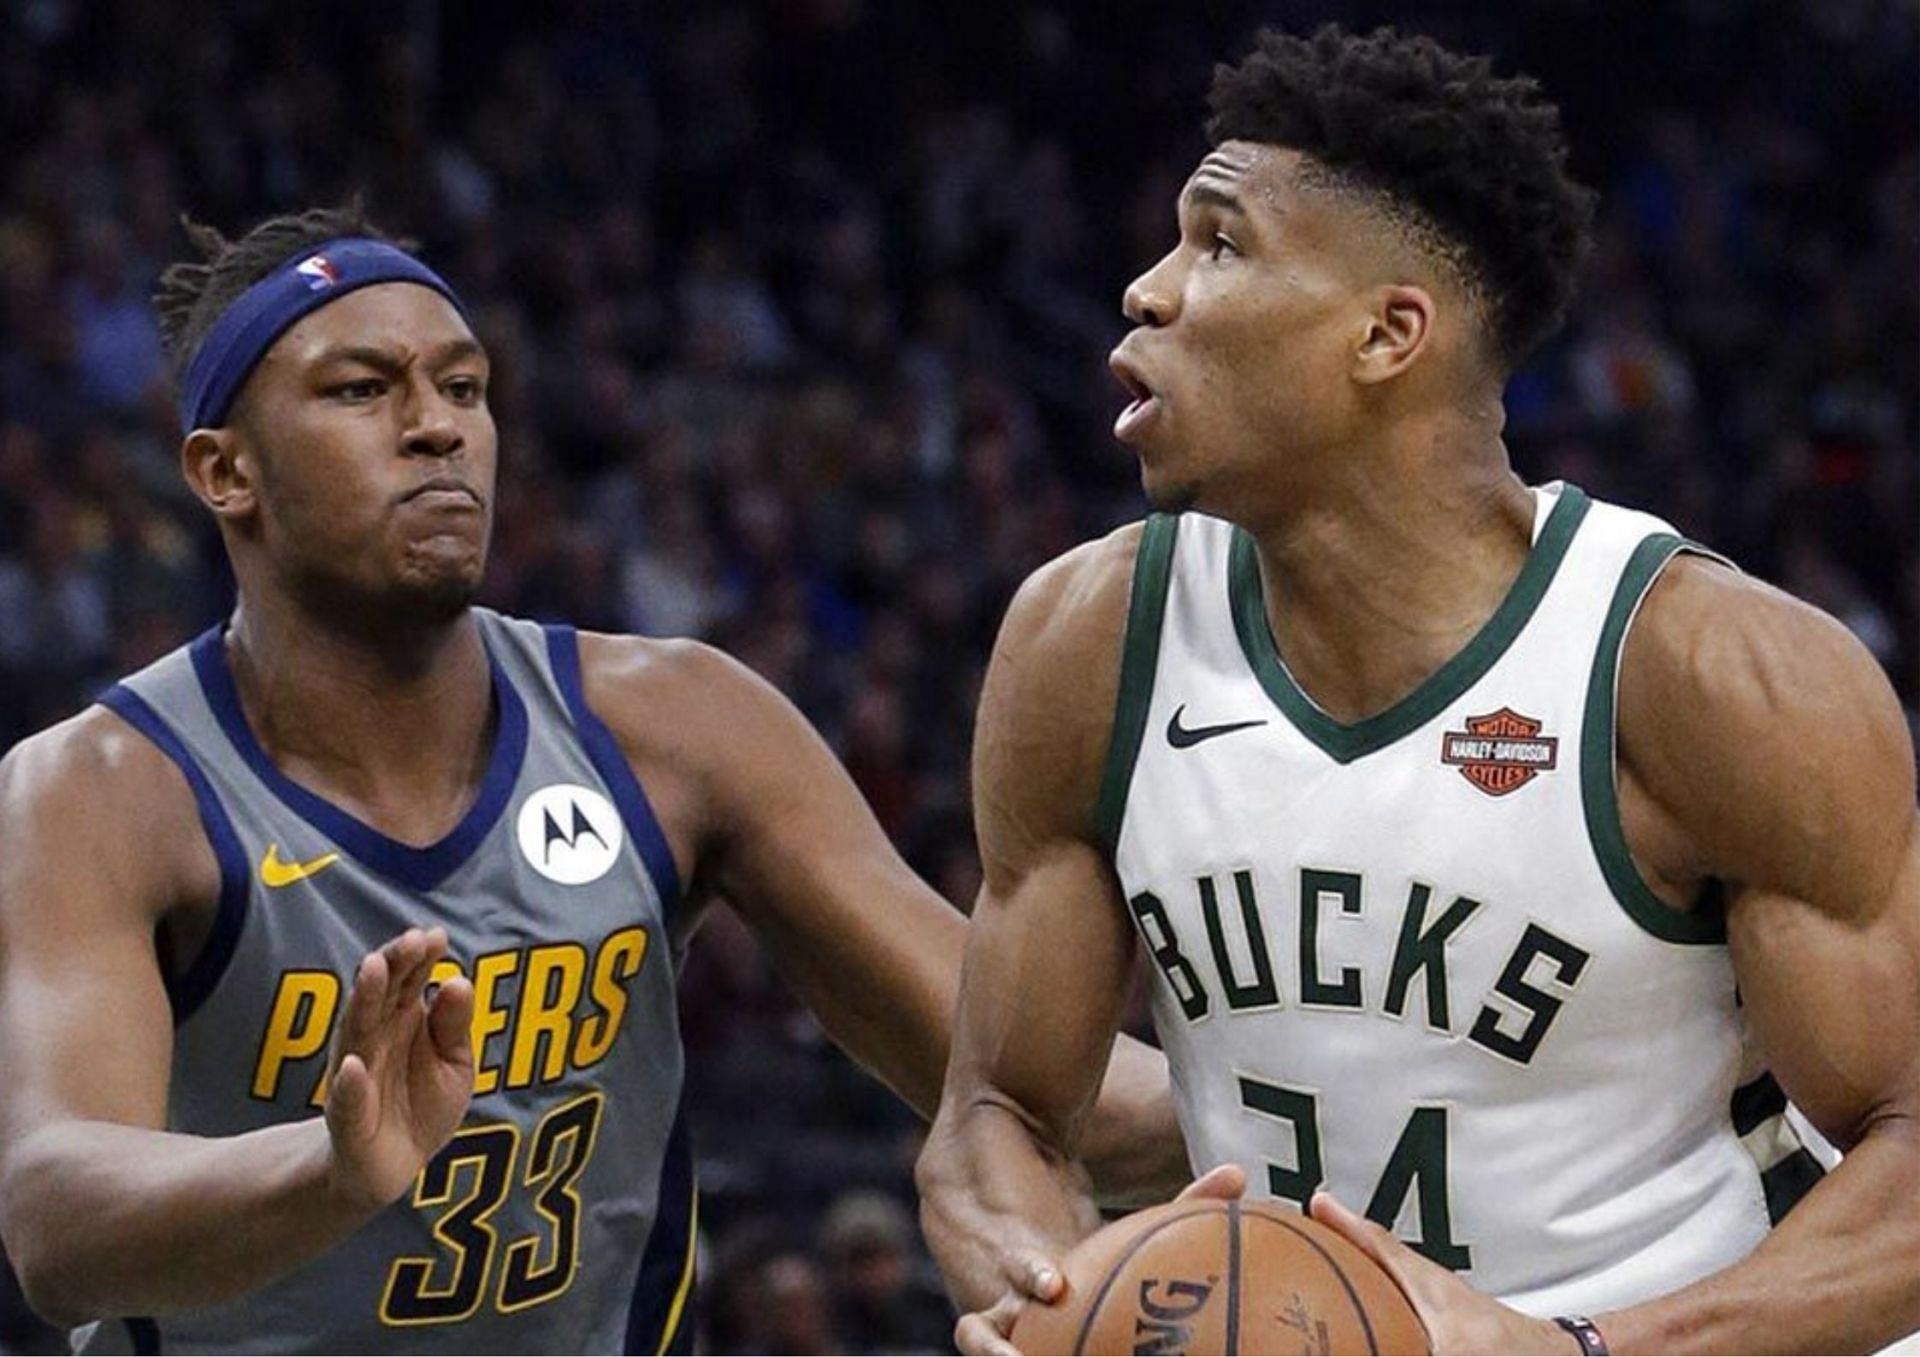 Giannis Antetokounmpo is probable tonight for the Milwaukee Bucks against the Indiana Pacers.